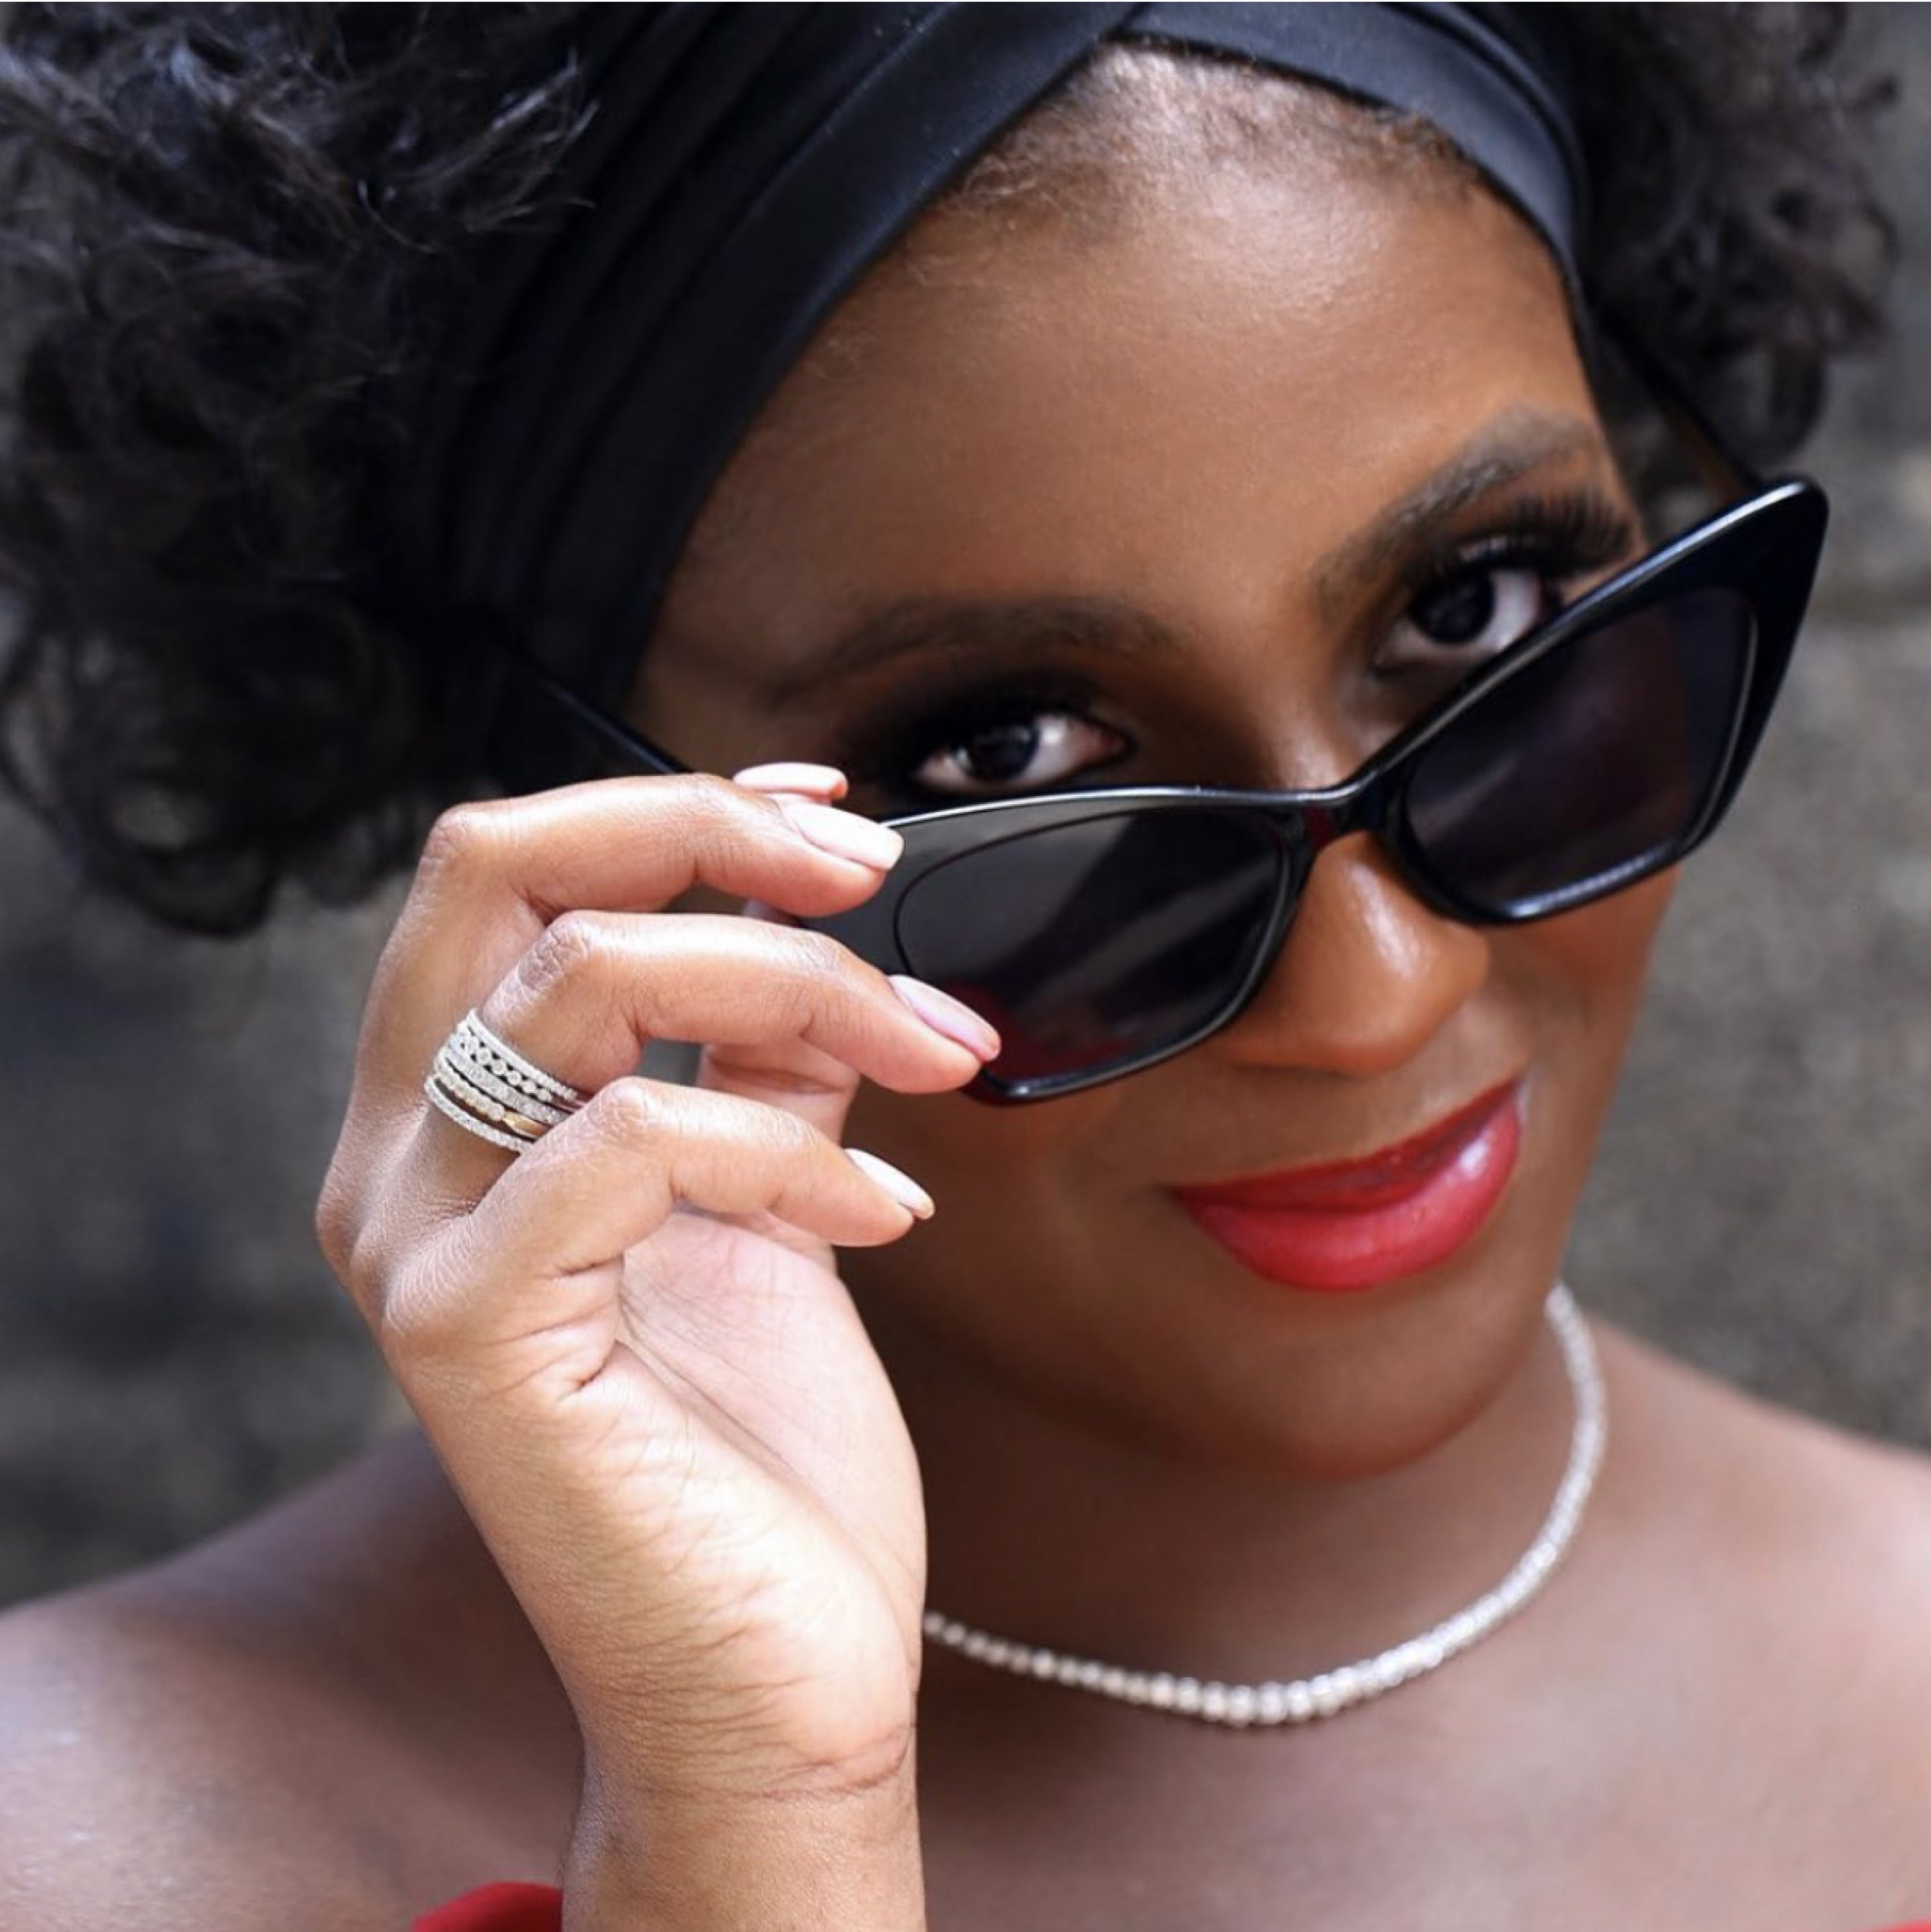 A woman presenting our stackable rings on her right ring finger while holding down the shades from her eyes.